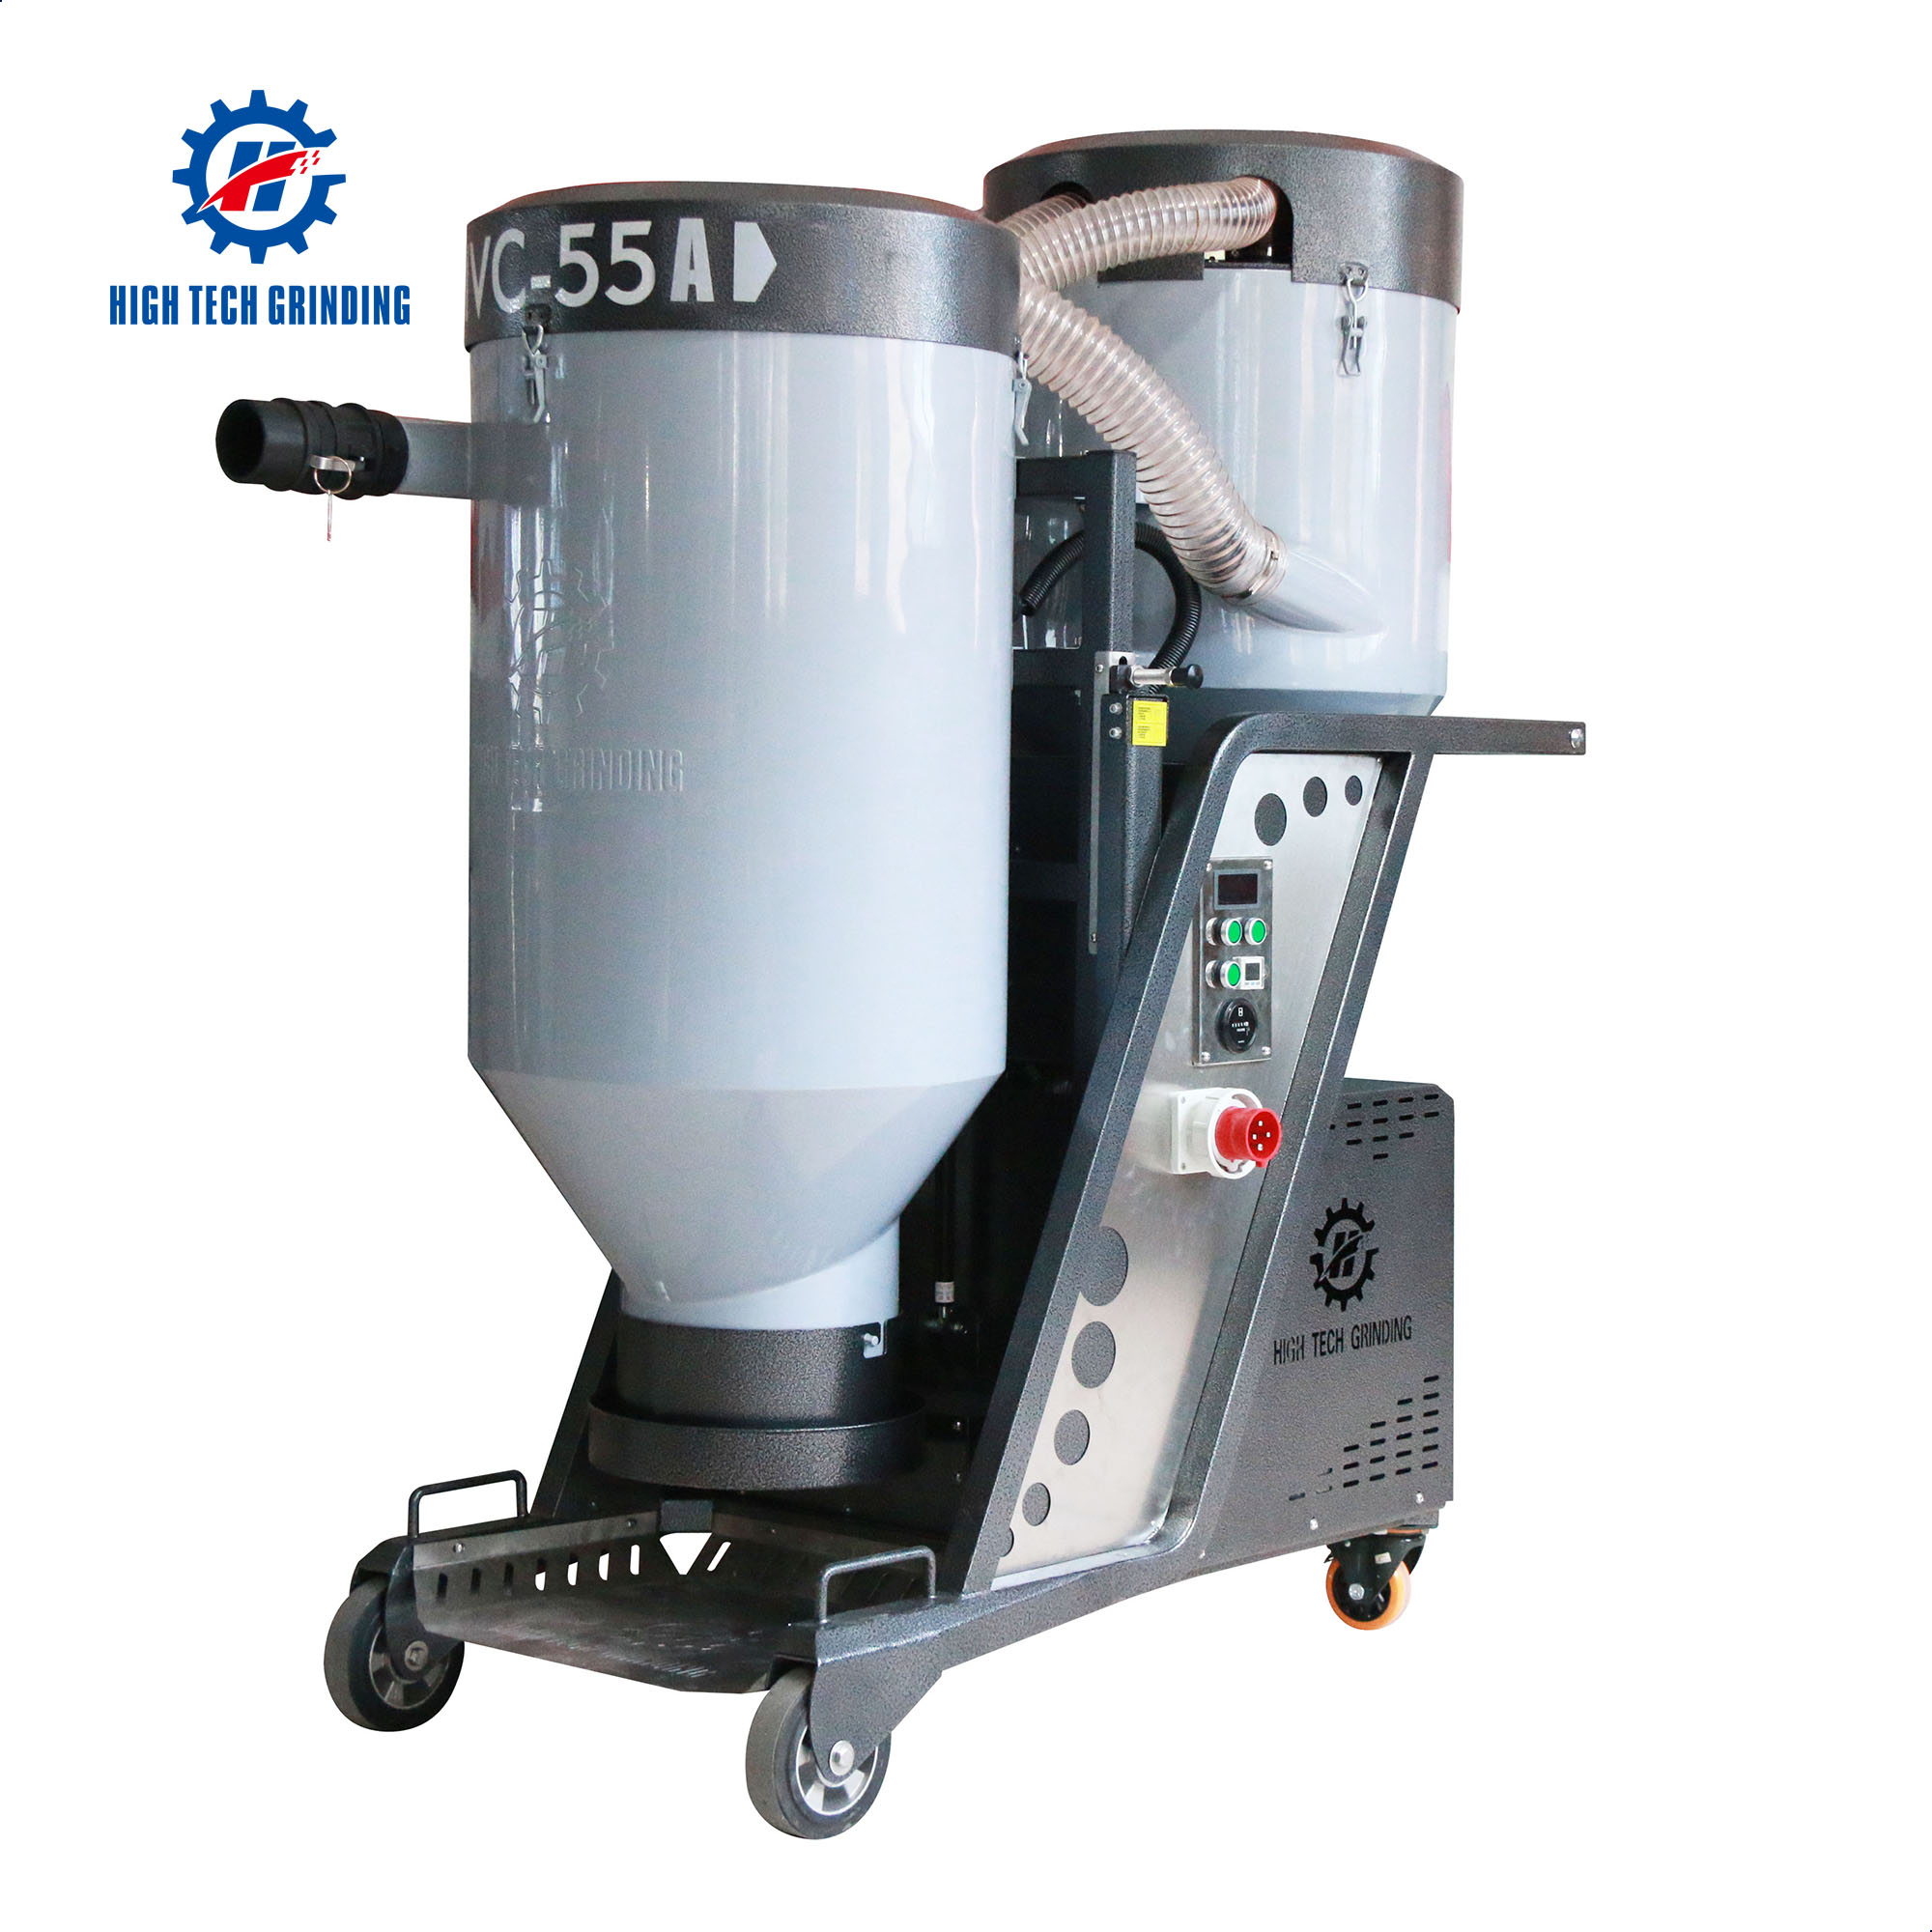 cyclone industrial vacuum cleaner price supplier in china